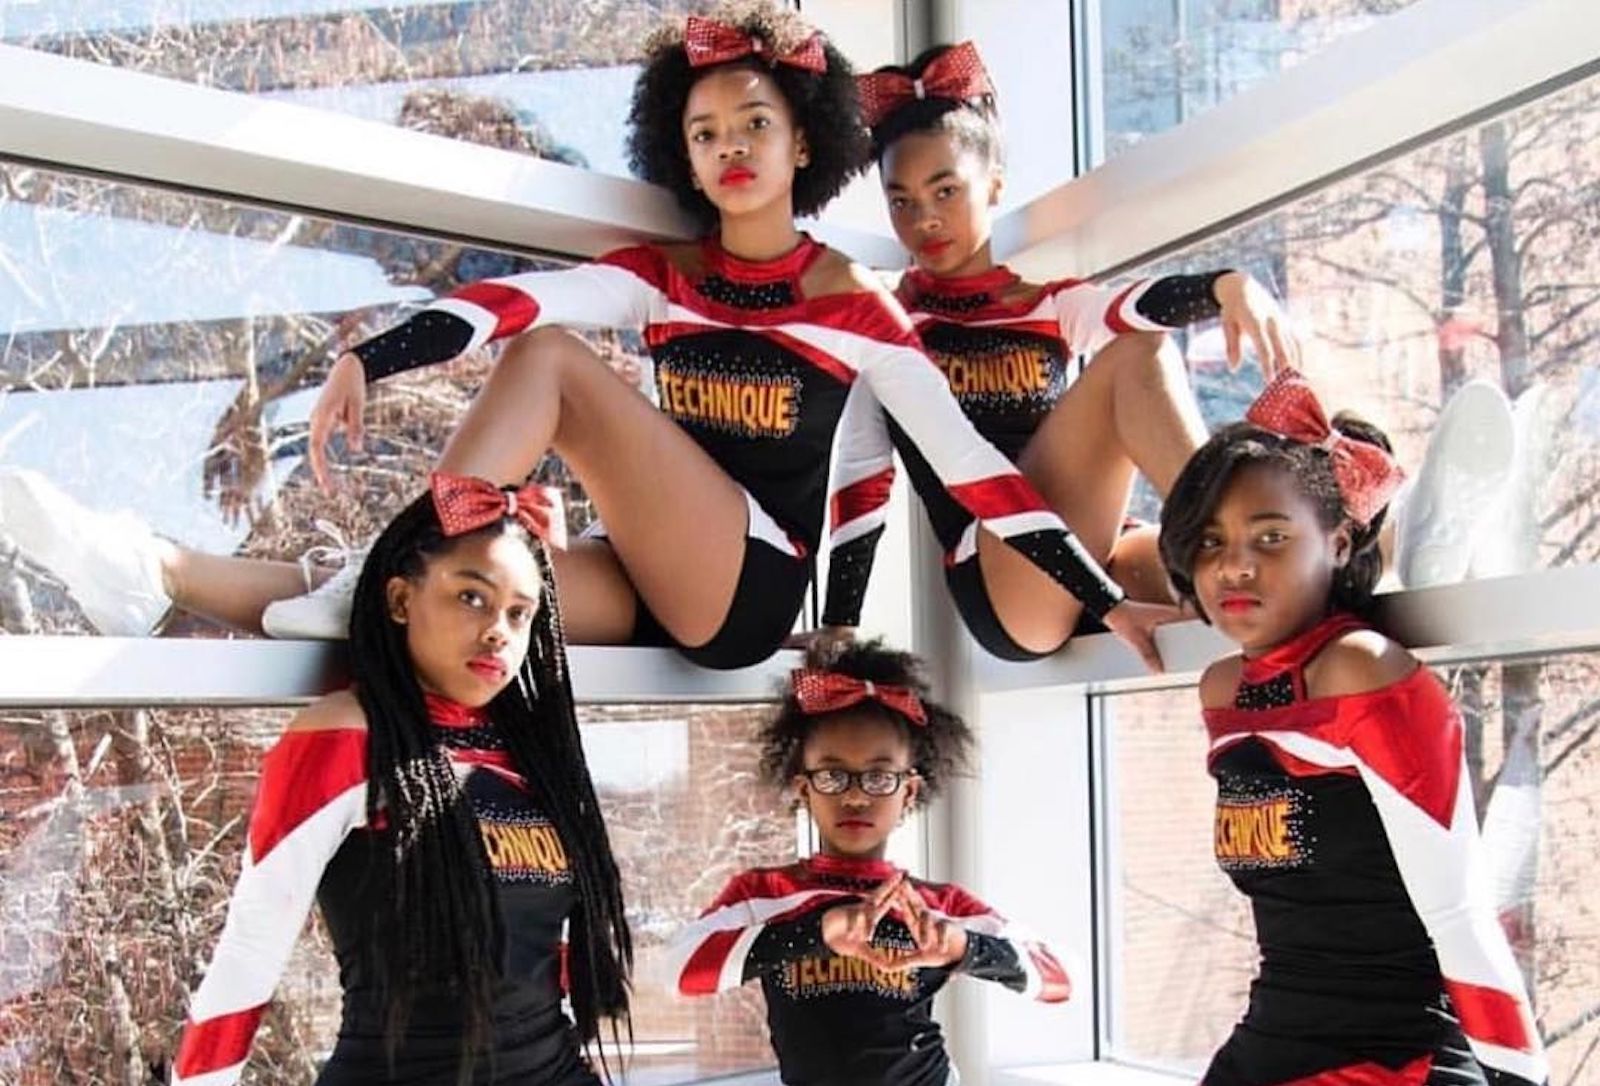 The Black Girls Cheer Movement Empowers Young Cheerleaders of Color	| Black Enterprise